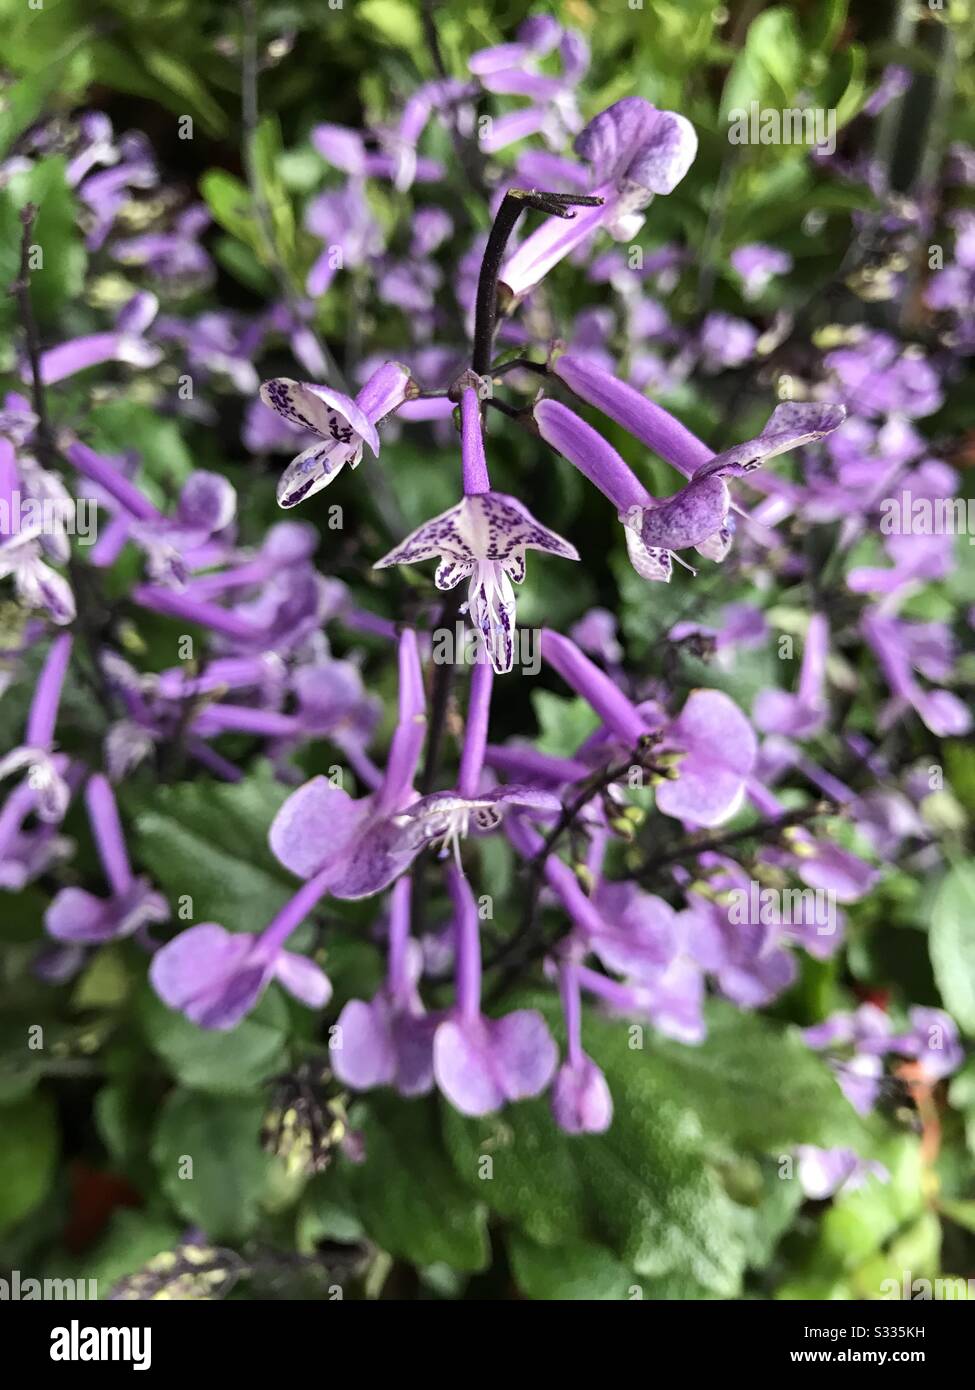 Plectranthus ‘Mona Lavender’; small sense shrub with lavender like flower with violet freckles , in a nursery ready for sale, tube flower, violet flower, Lilac colour flower Stock Photo